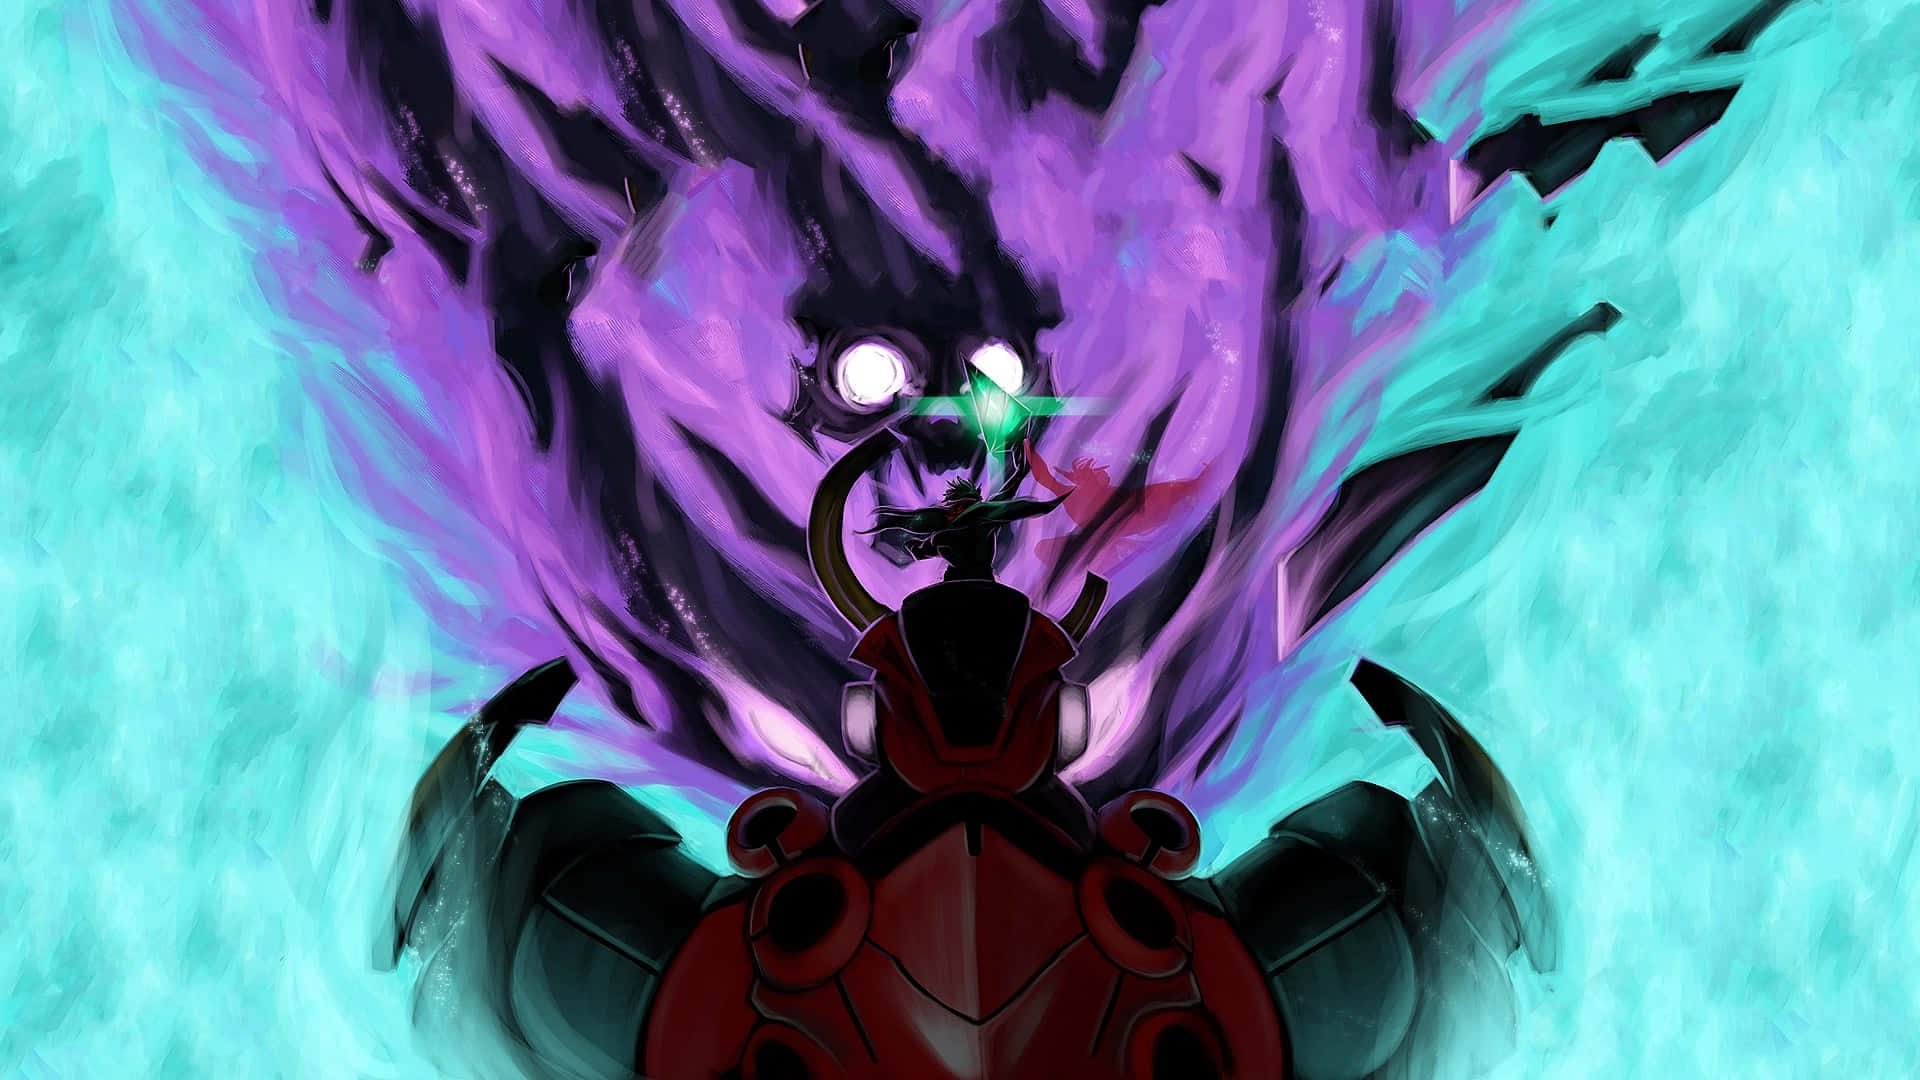 "Rise to the Heavens with Gurren Lagann!"